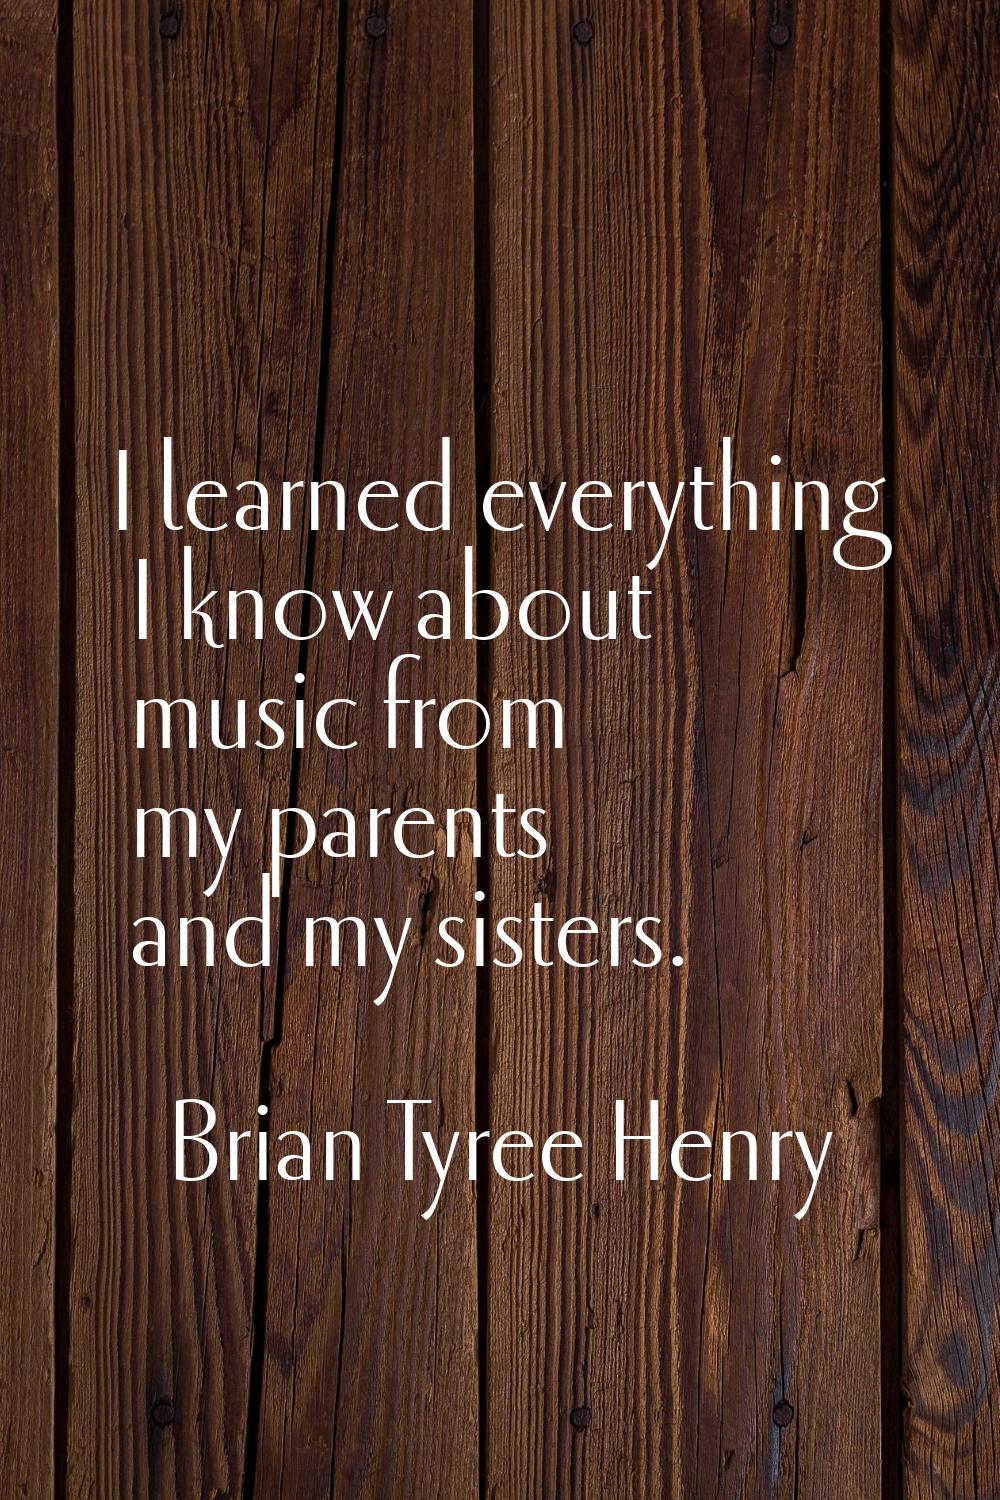 I learned everything I know about music from my parents and my sisters.